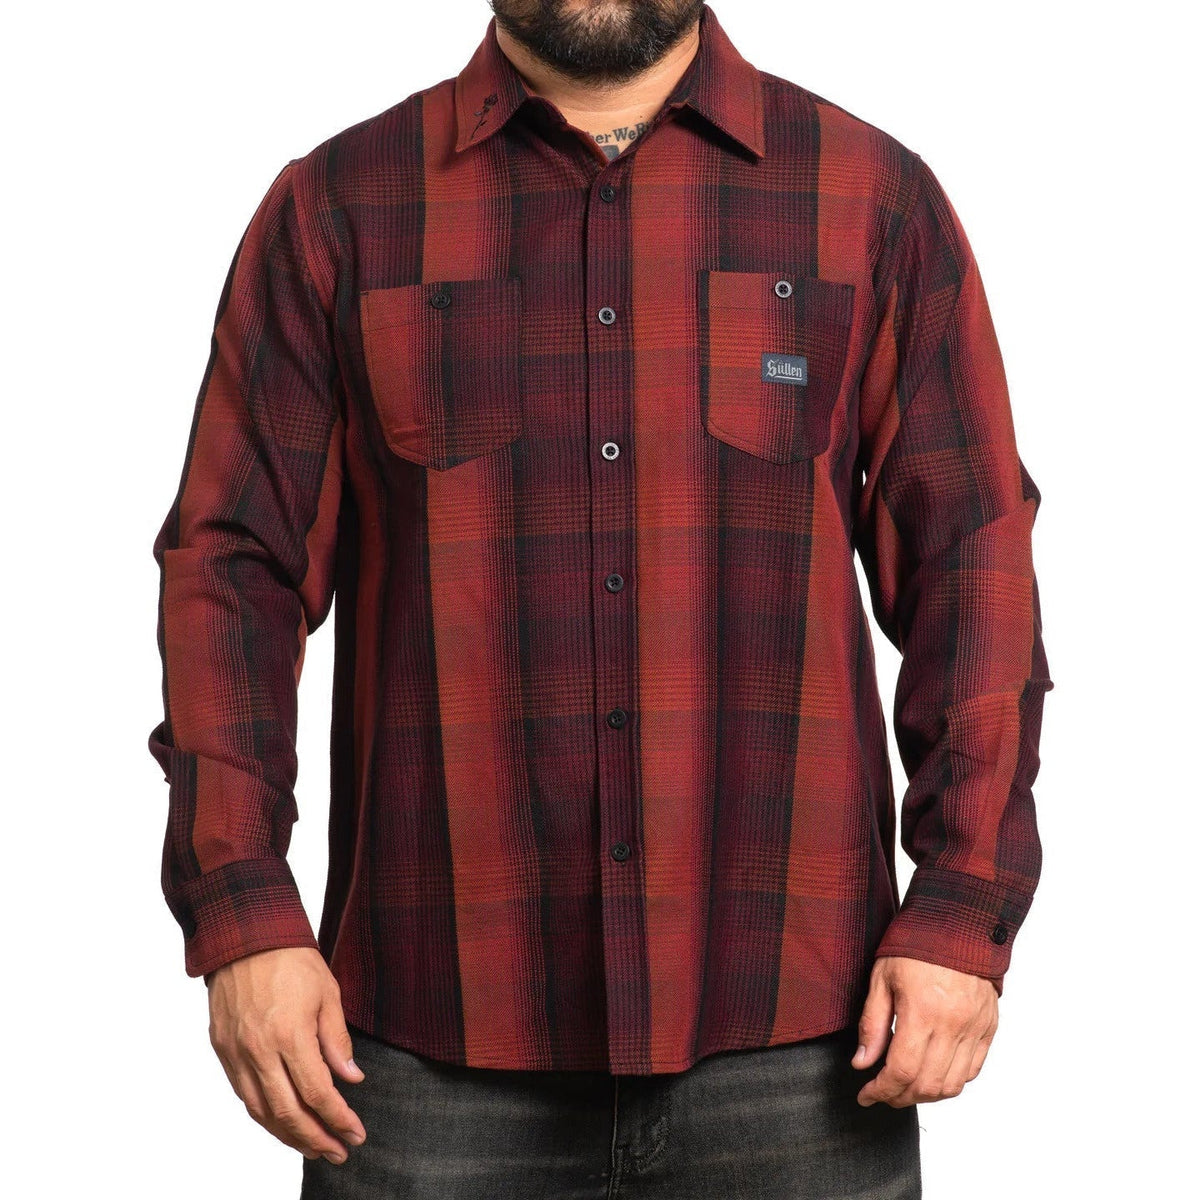 SULLEN-ART-COLLECTIVE-EMBERS-FLANNEL - FLANNEL - Synik Clothing - synikclothing.com